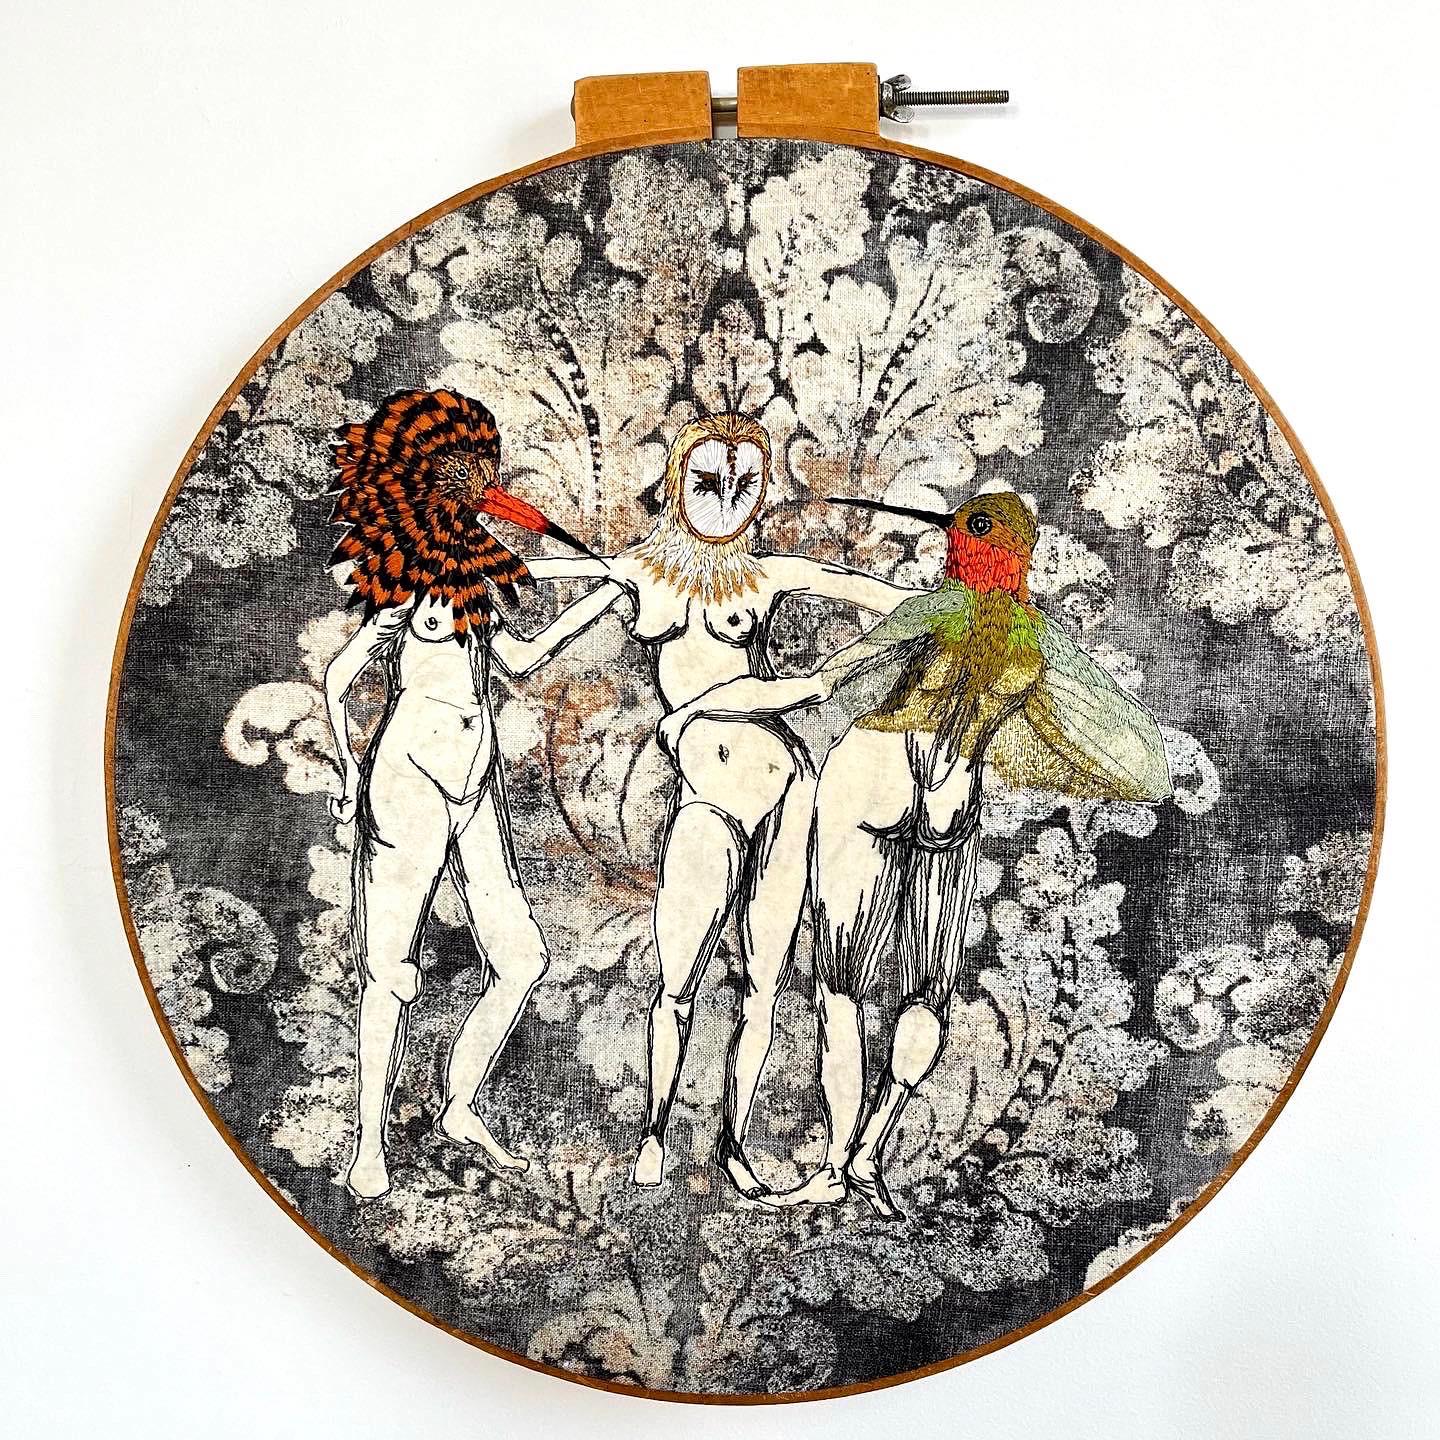 The Healing Three Graces, 2022. Freehand machine and hand embroidery on organza and cotton on decor fabric. Stretched in a vintage wooden embroidery hoop. 